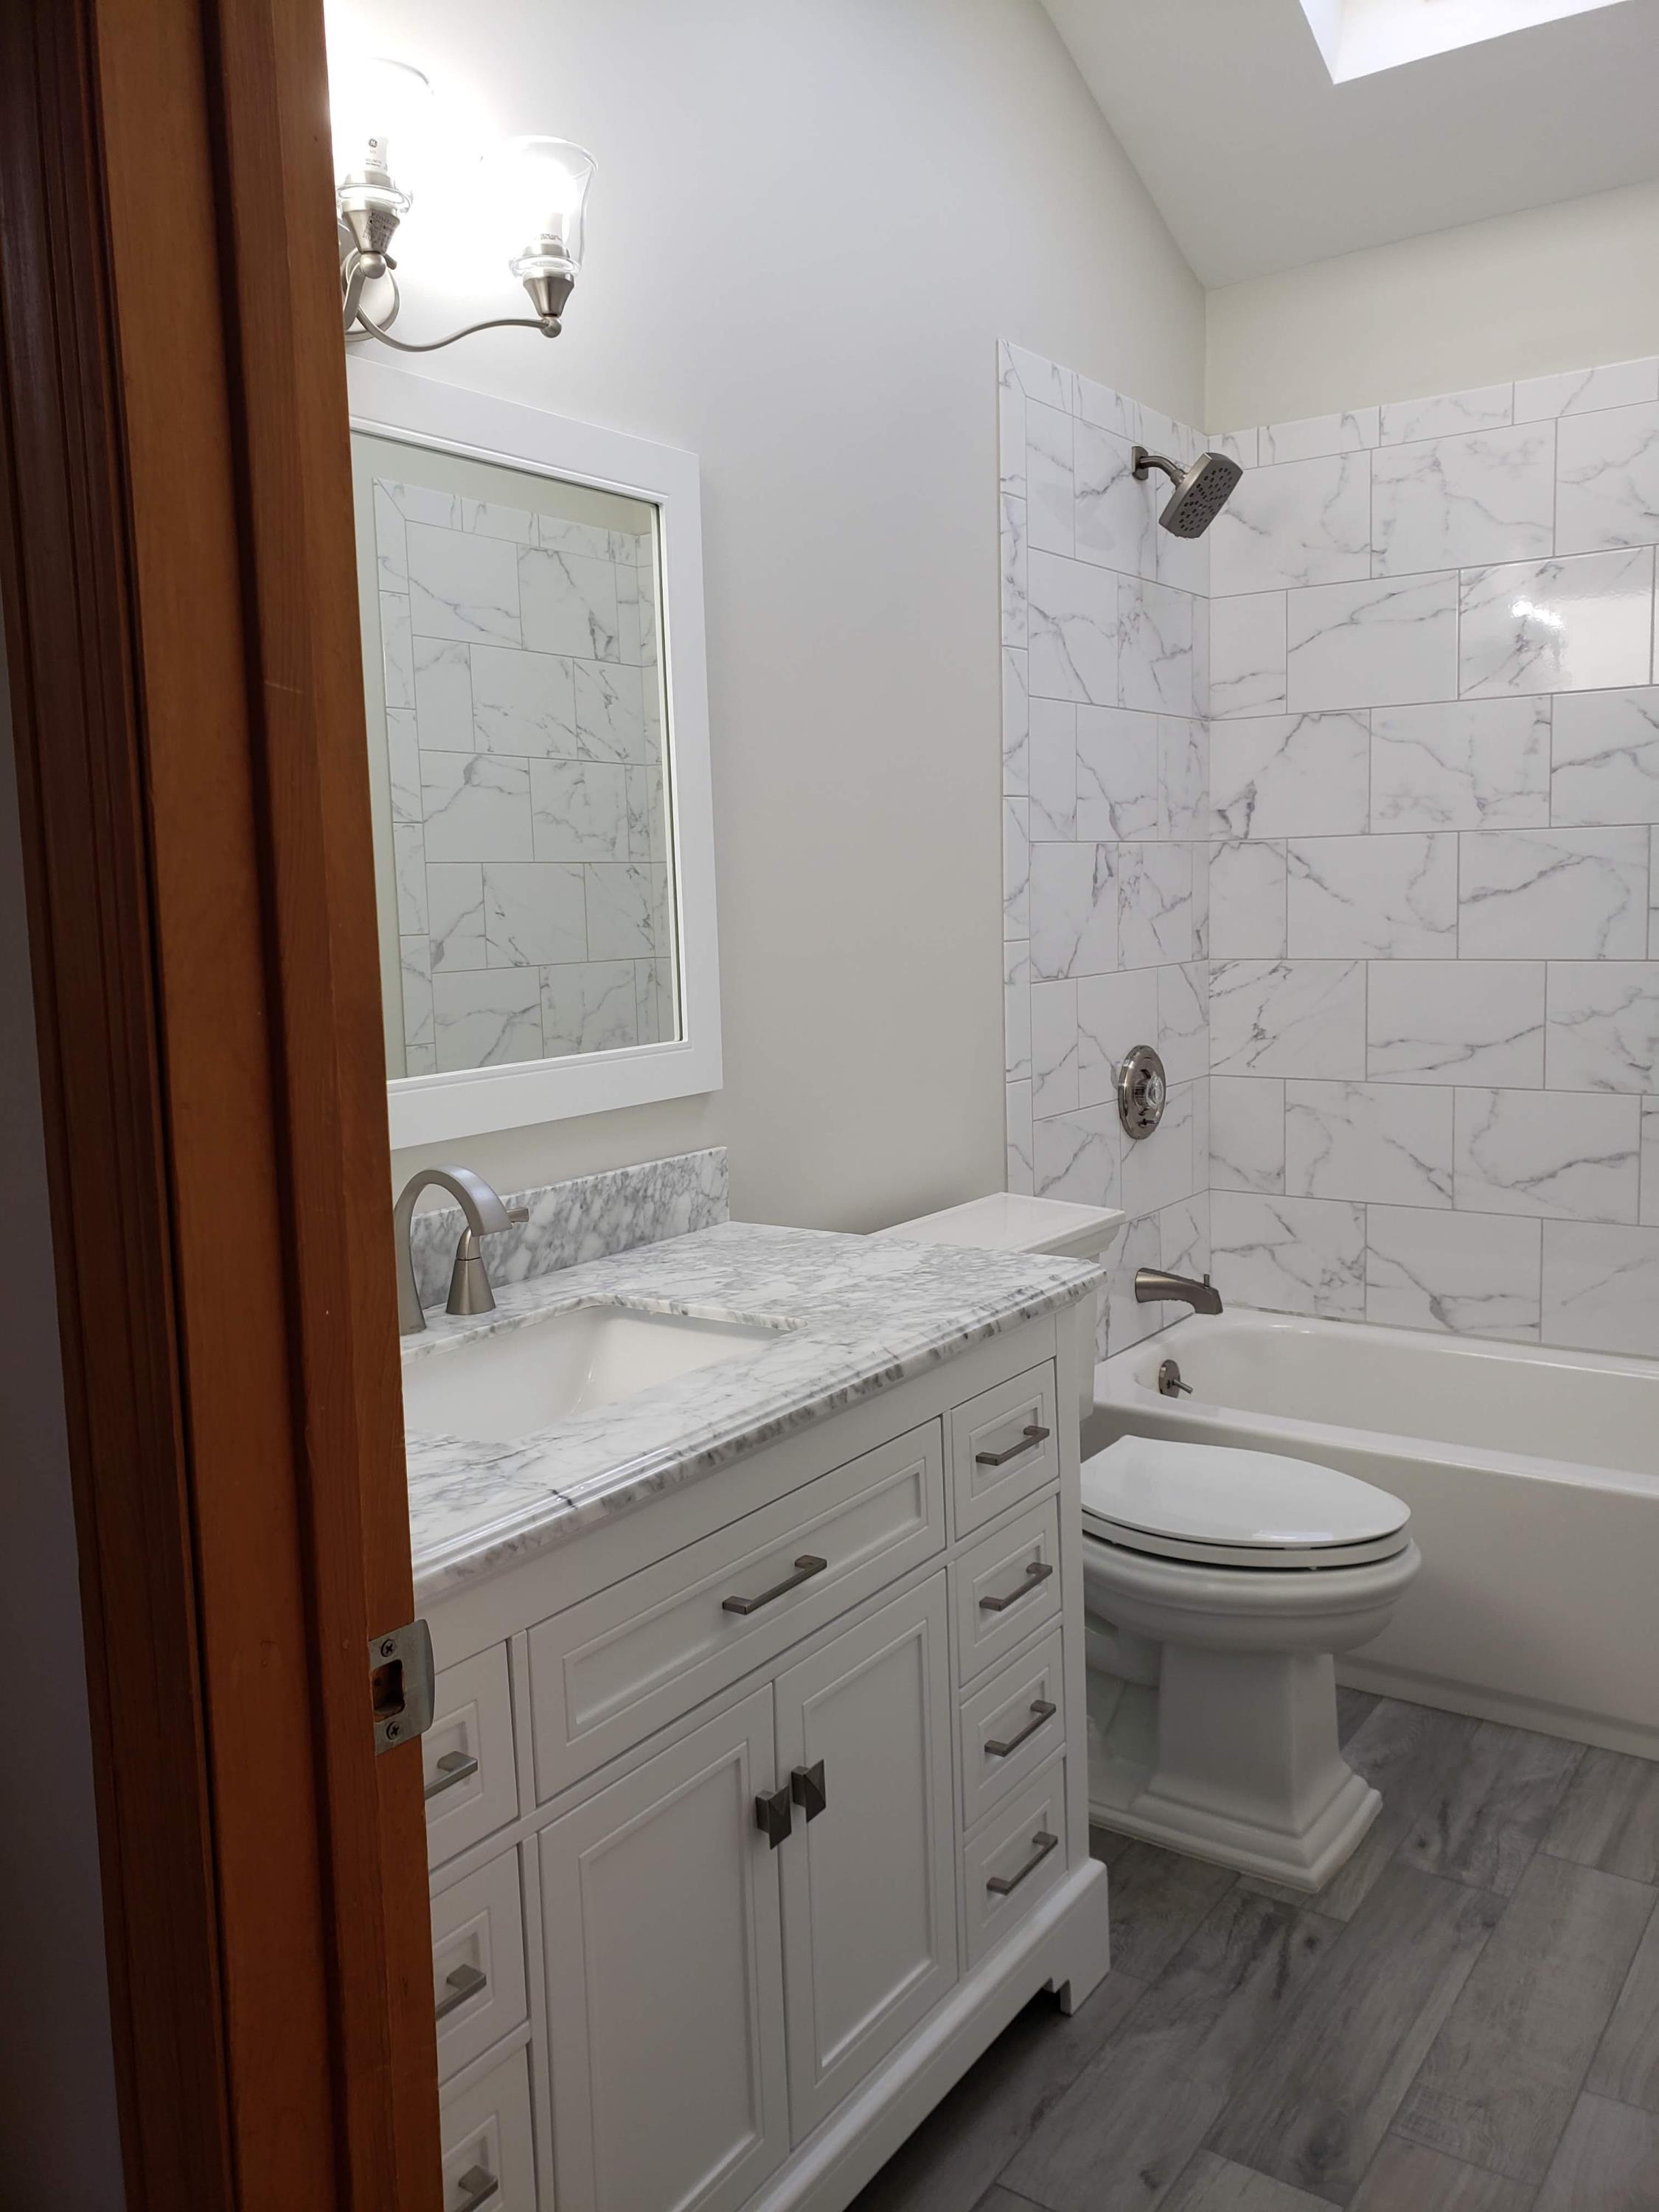 New bathroom remodeling project with white walls